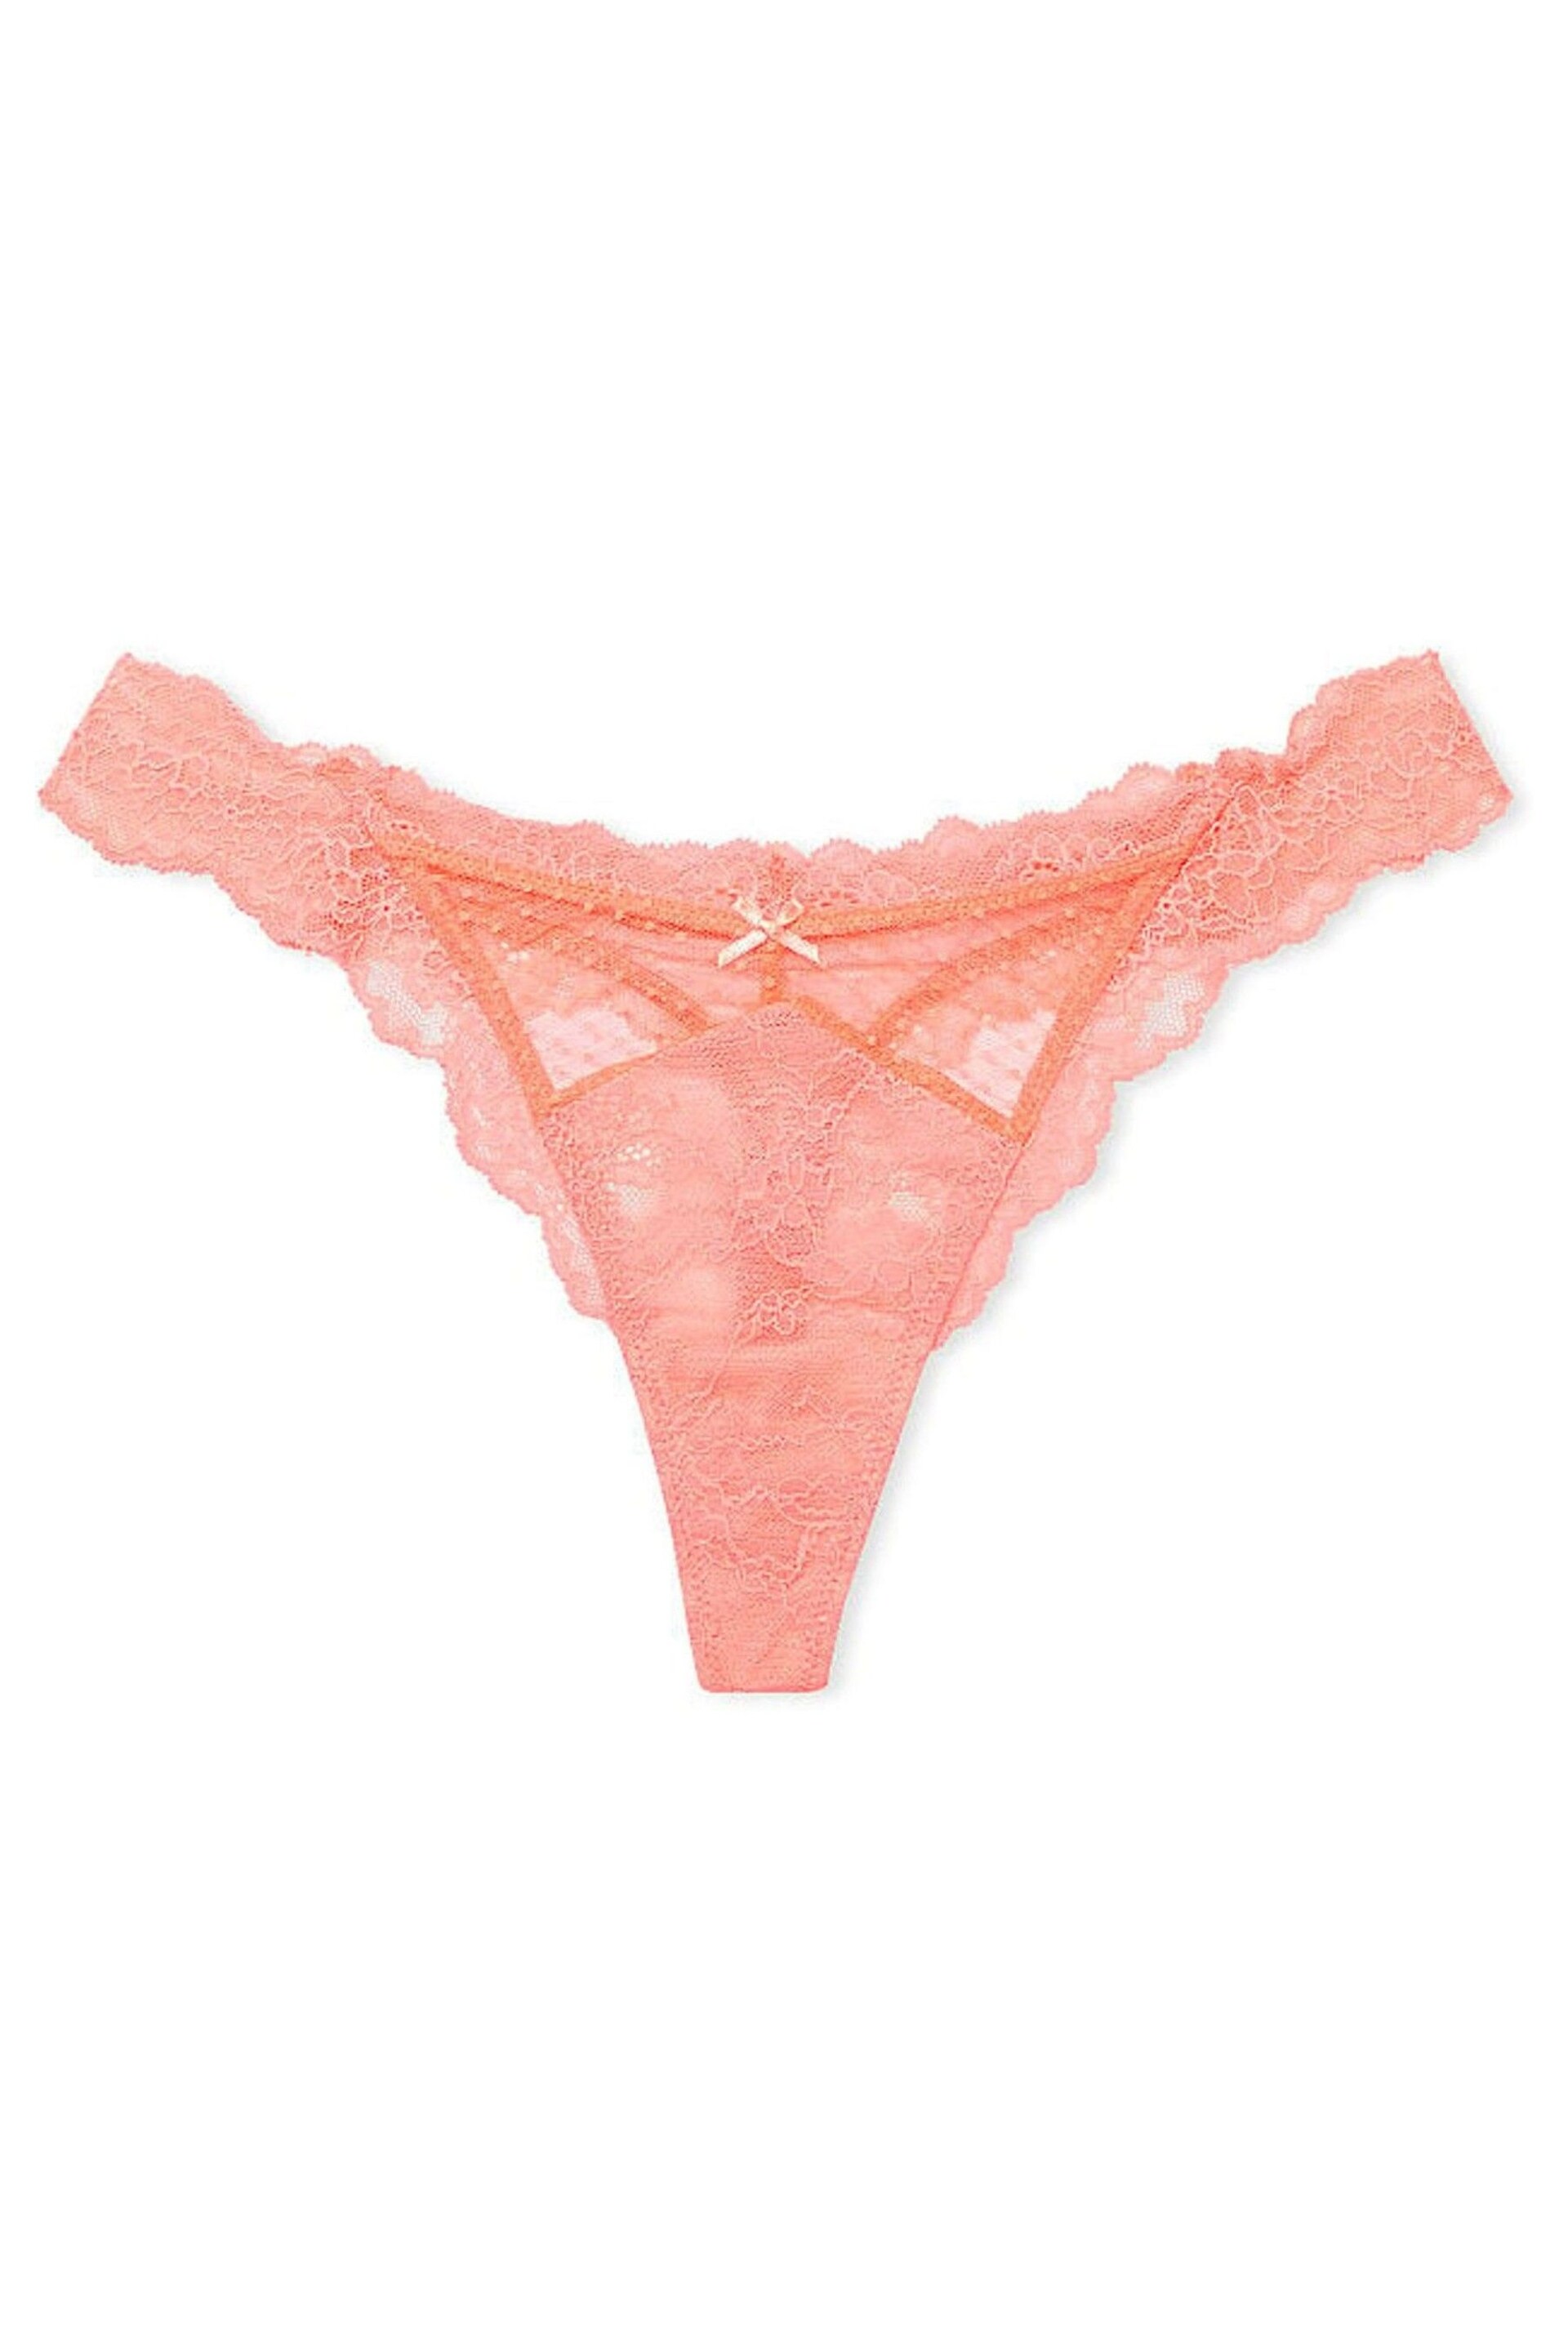 Victoria's Secret Neon Nectar Orange Thong Lace Knickers - Image 3 of 3